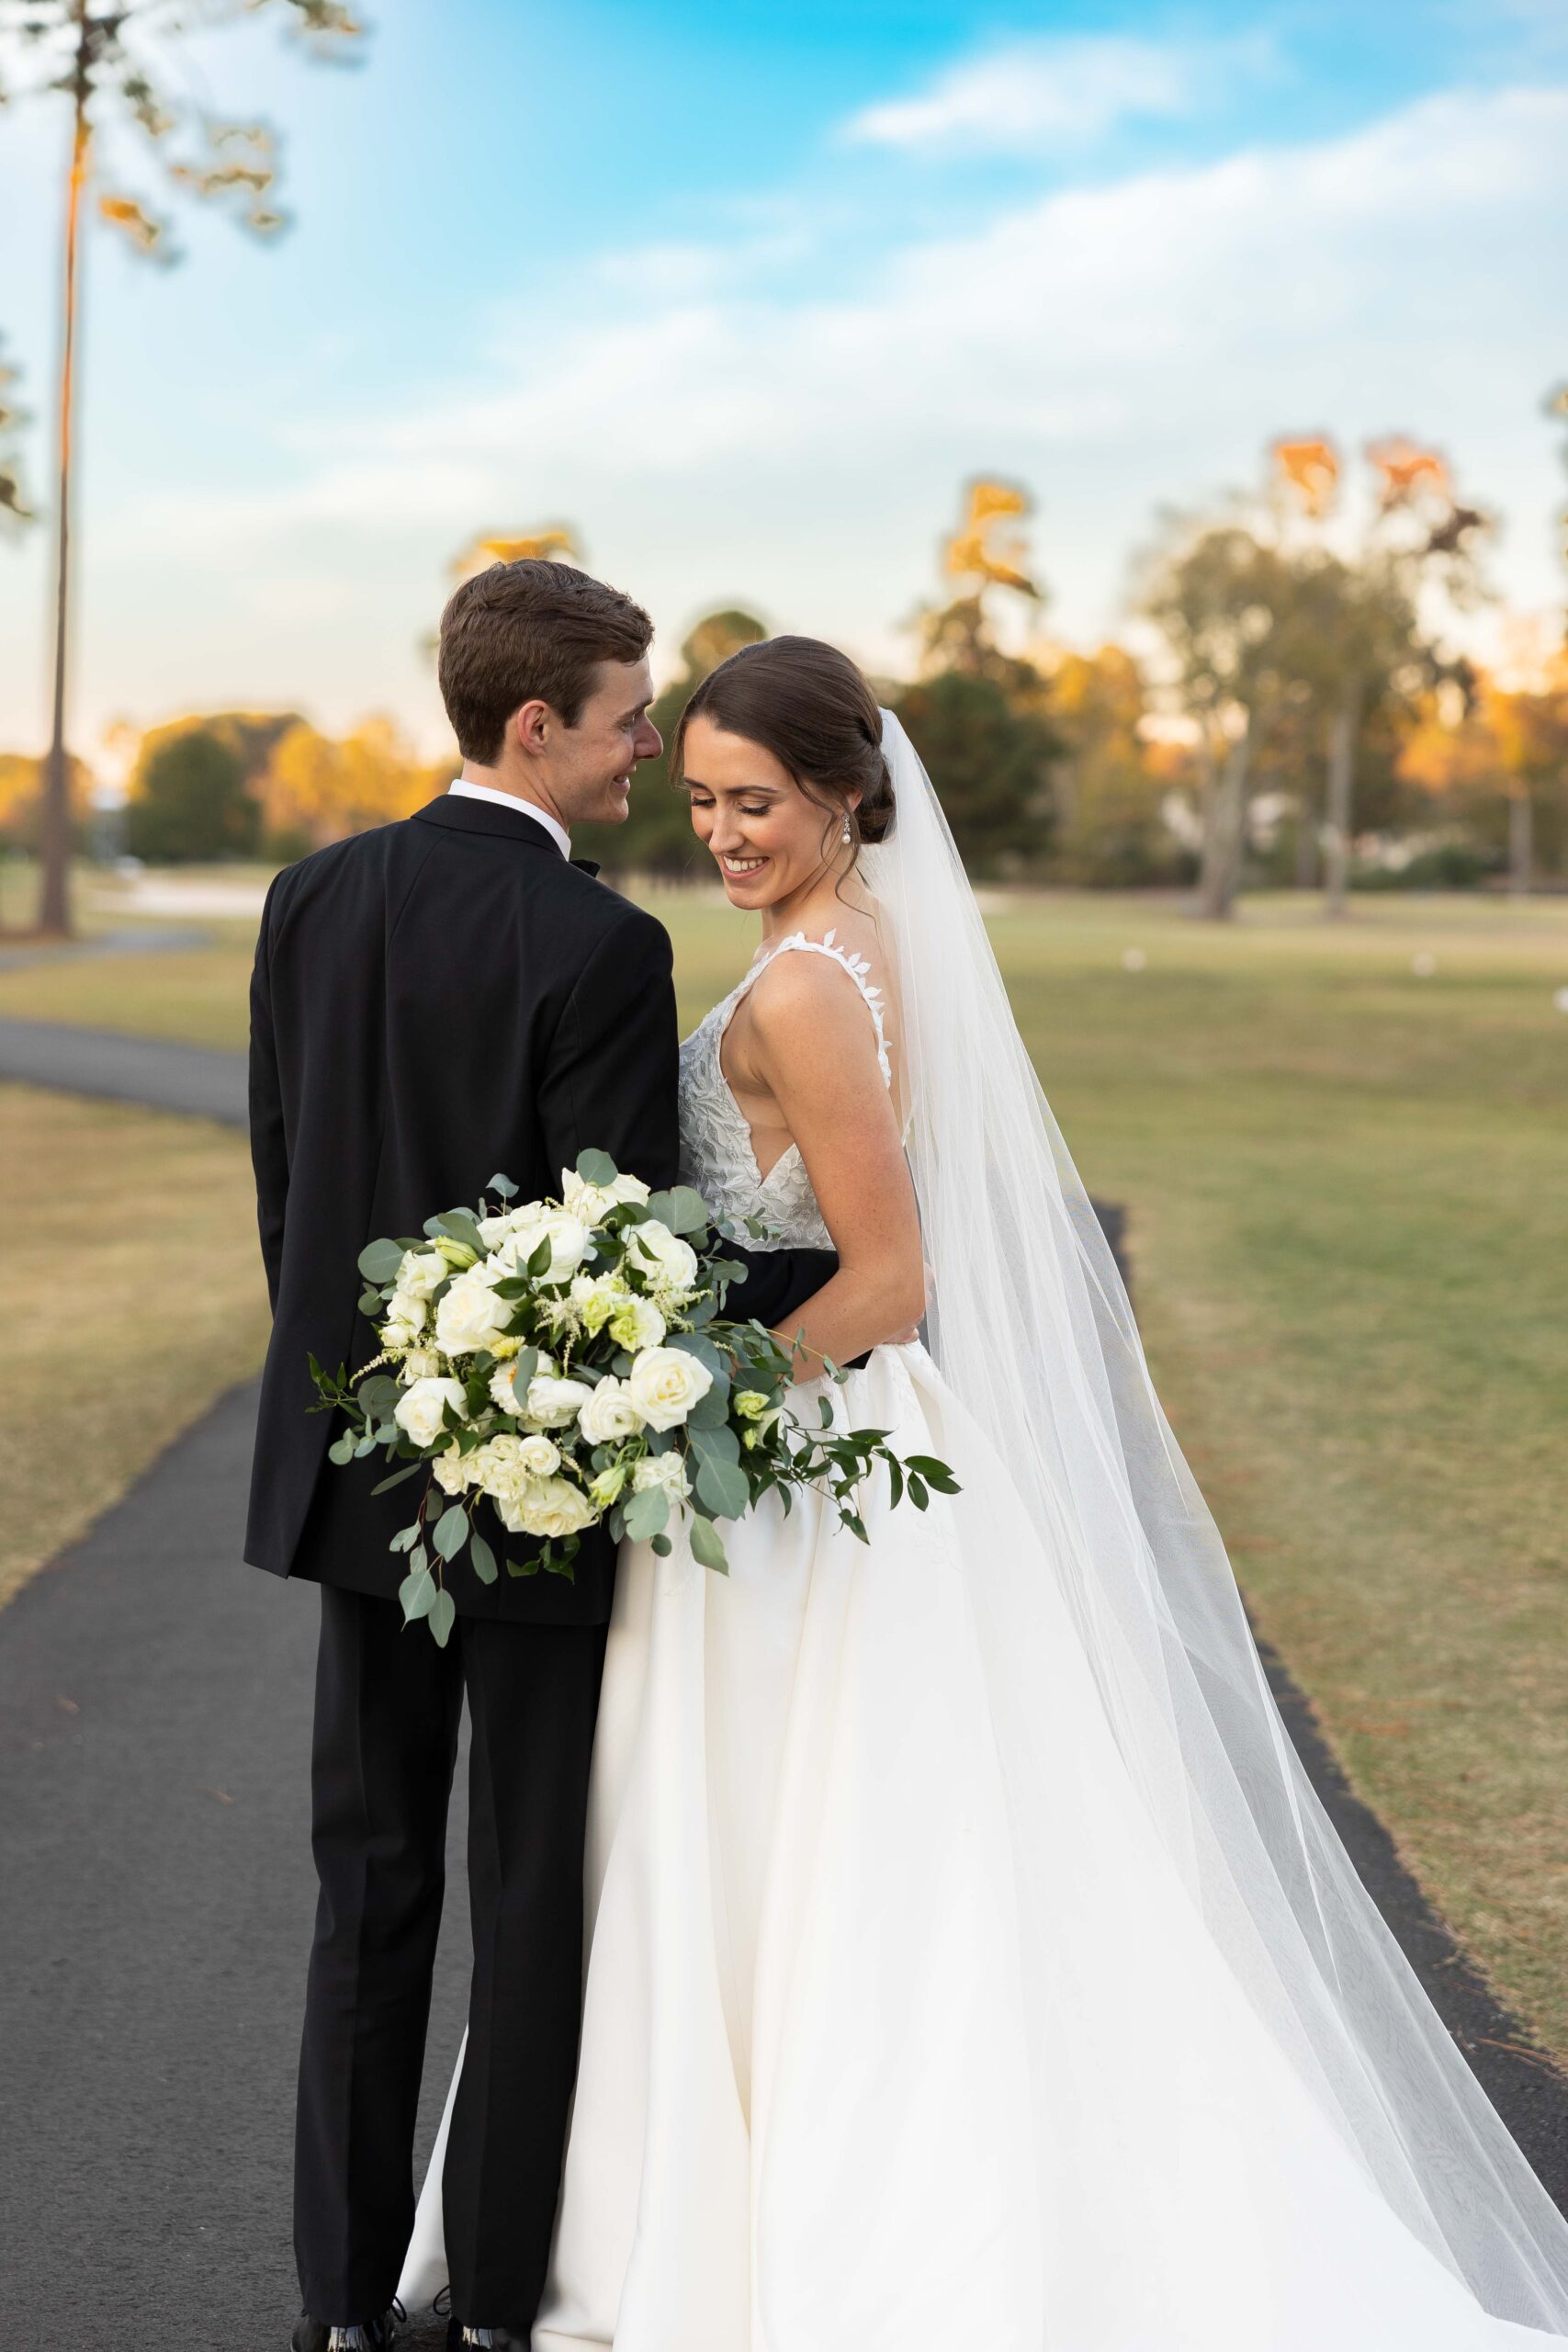 Bride in plunging v lace detailed wedding dress hugs groom in black tux holding. alarg bouquet of white flowers at prestonwood country club